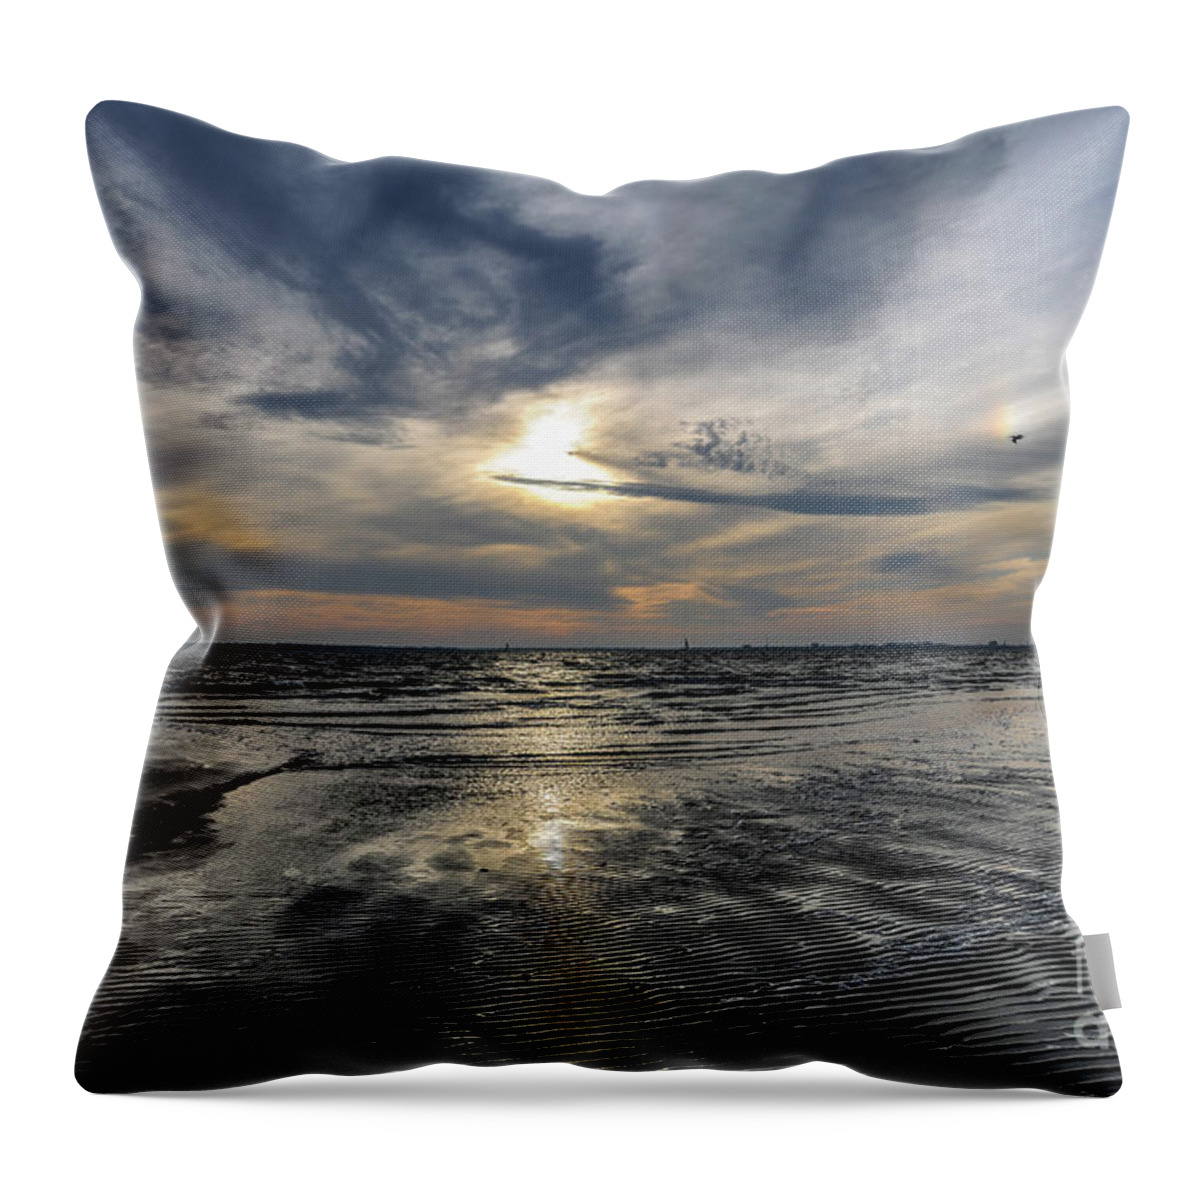 Sunrise Throw Pillow featuring the photograph Storms Passing by Dale Powell